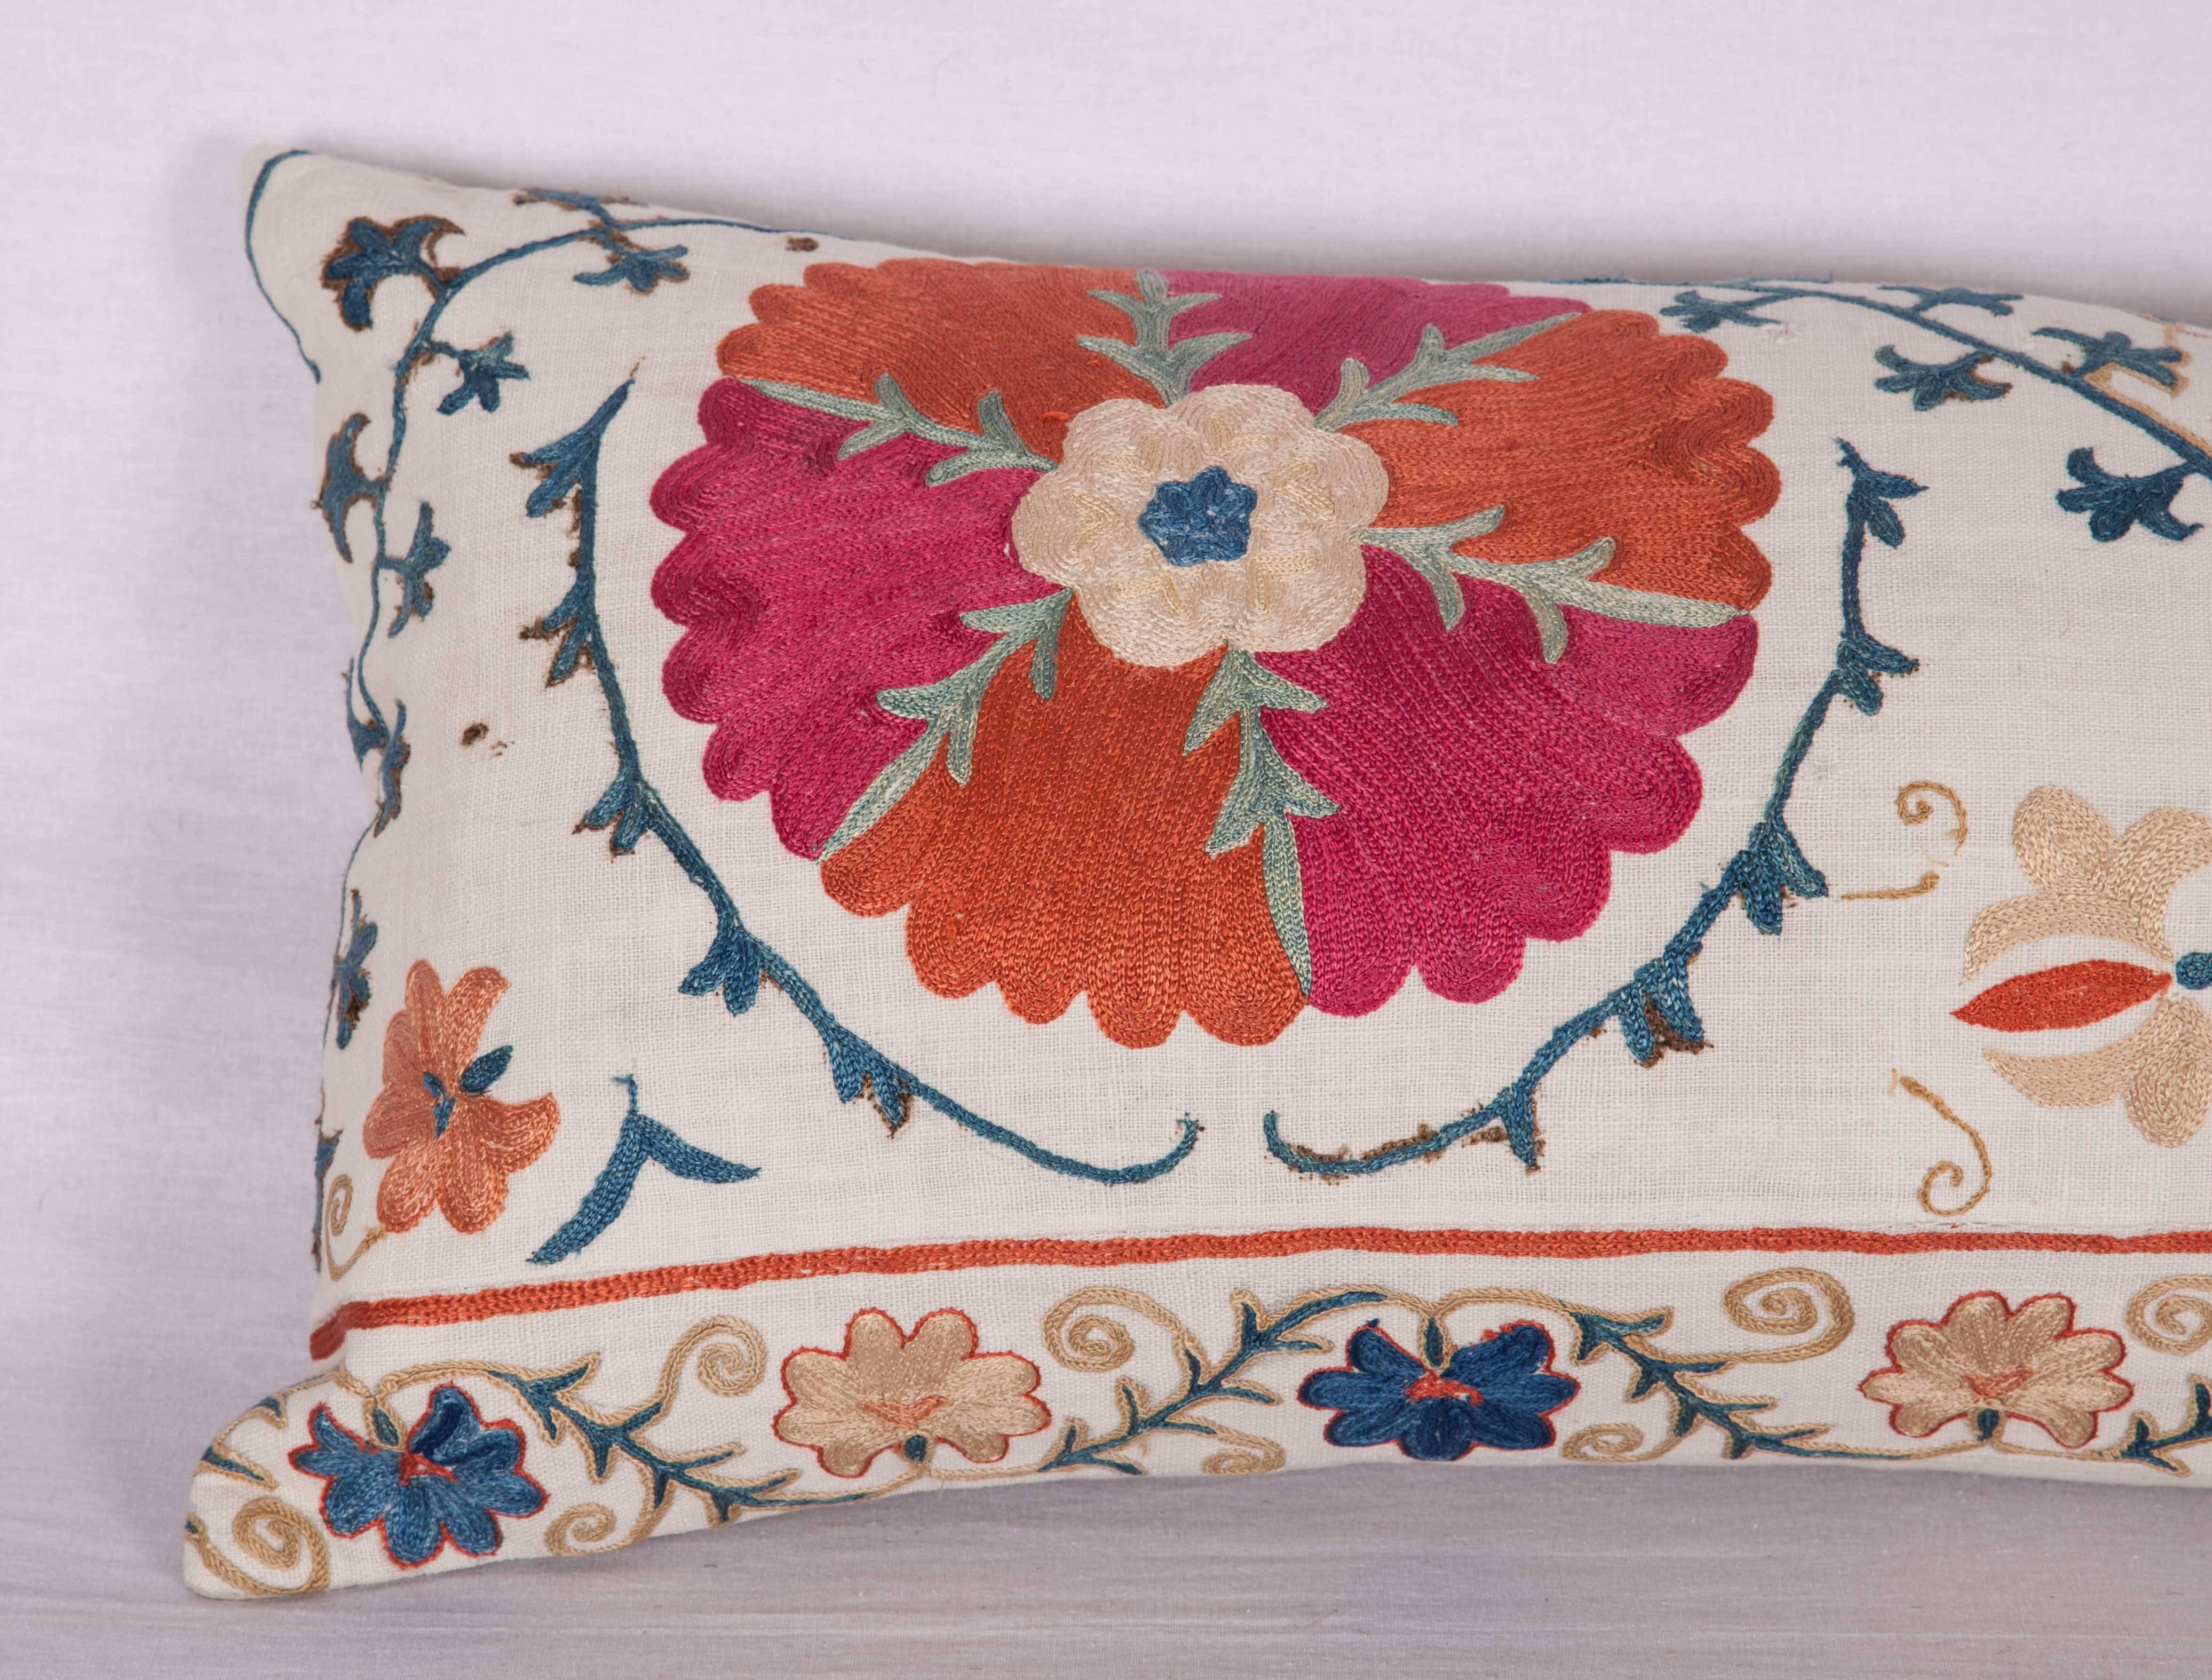 The pillow is made out of a 19th century, Uzbek Bukhara Suzani. It does not come with an insert but it comes with a bag made to the size and out of cotton to accommodate the filling. The backing is made of linen. Please note ' filling is not